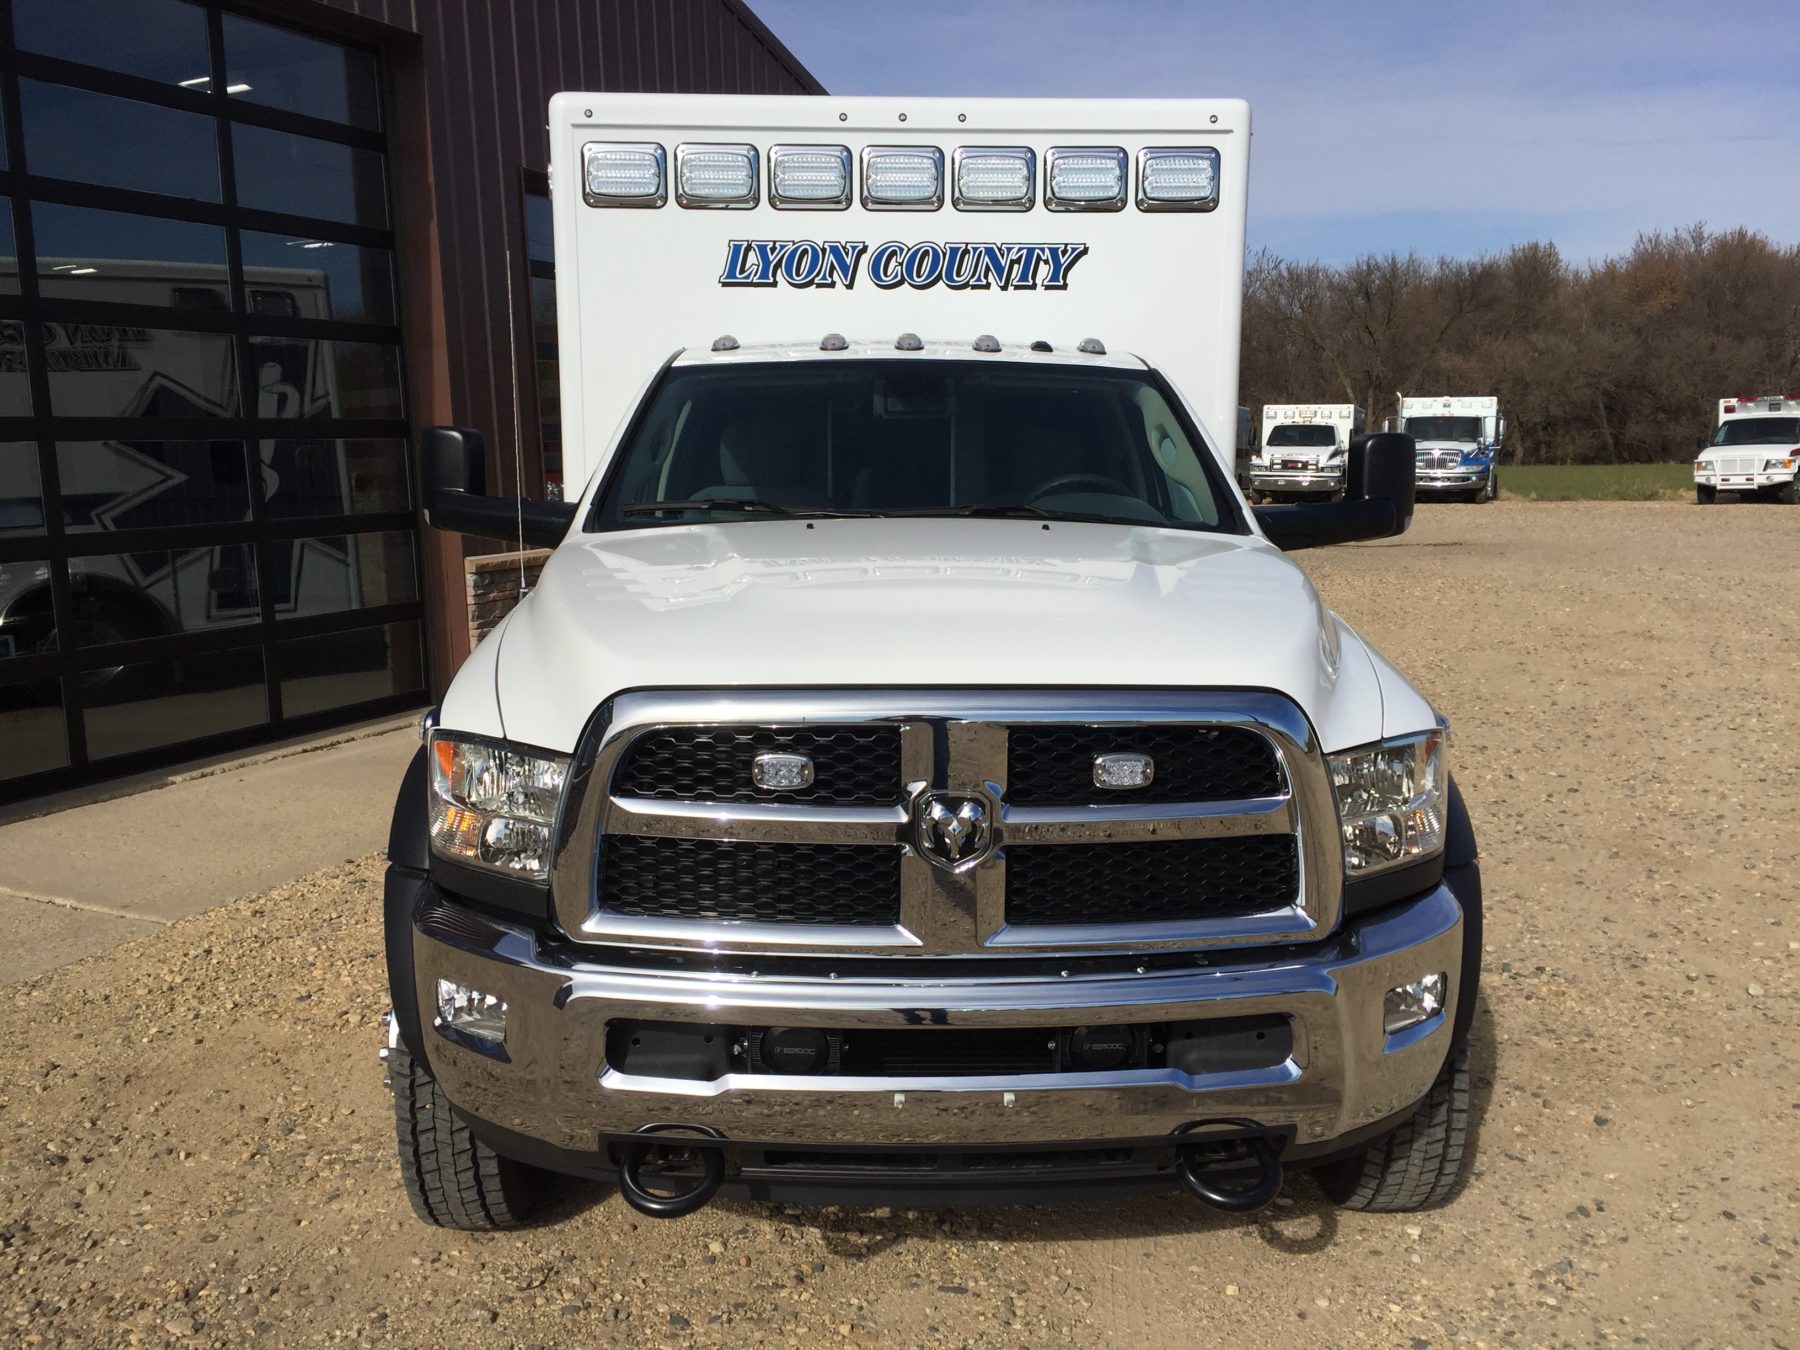 2017 Ram 4500 4x4 Heavy Duty Ambulance For Sale – Picture 7